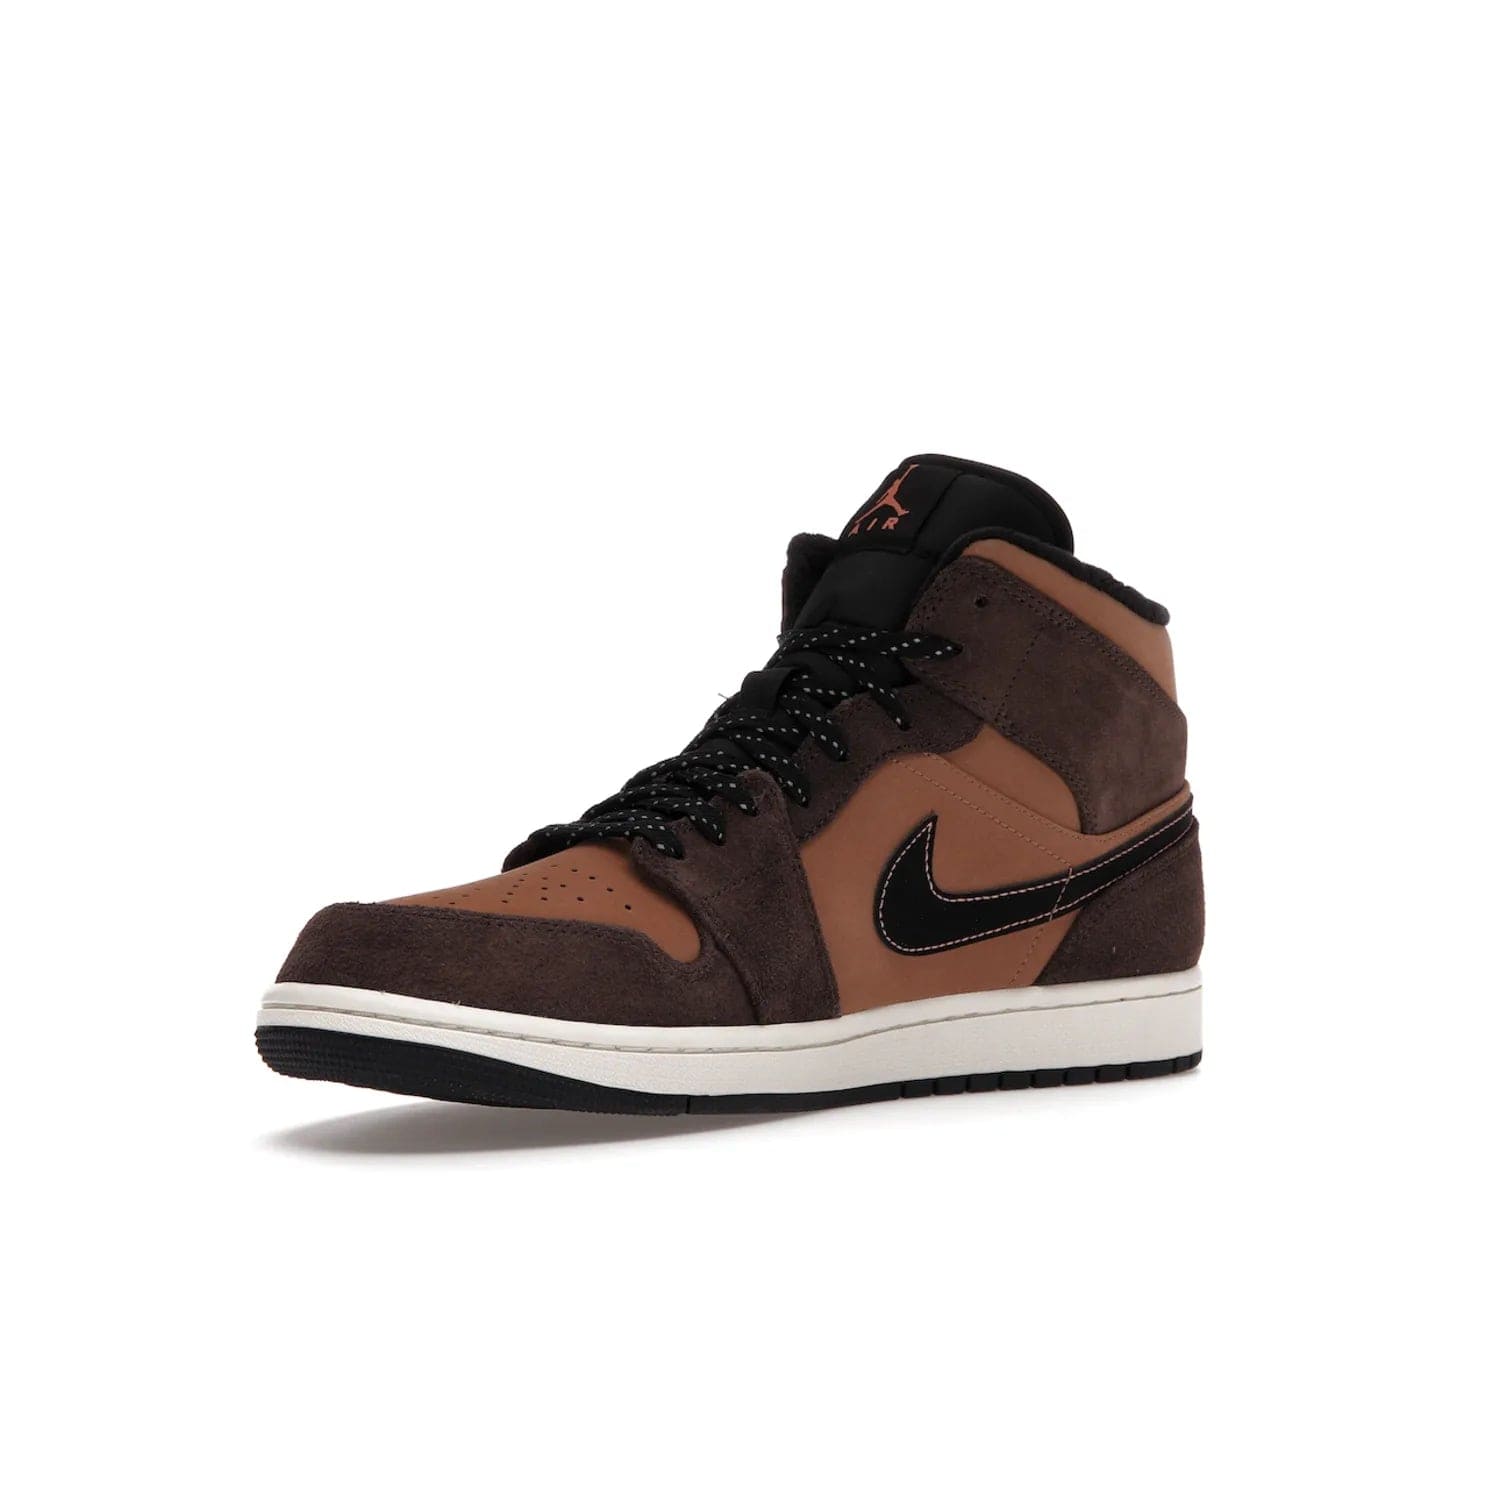 Jordan 1 Mid SE Dark Chocolate - Image 15 - Only at www.BallersClubKickz.com - This fashionable and functional Jordan 1 Mid SE Dark Chocolate features a light brown Durabuck upper, dark brown suede overlays, black Swoosh logos and reflective patch at heel. A must-have for any sneakerhead!